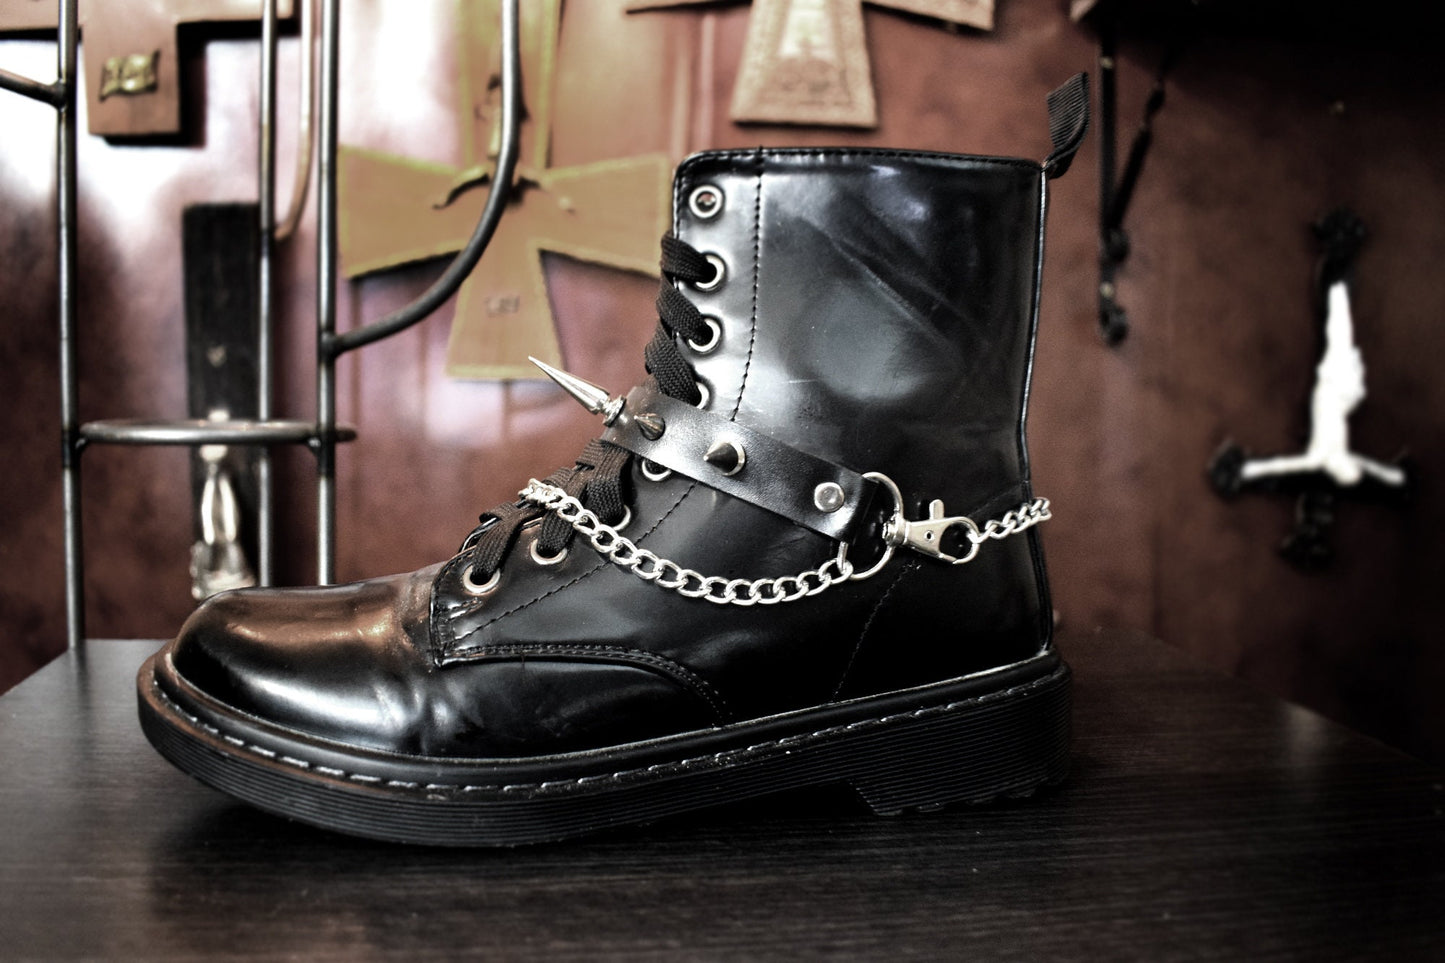 Handmade Faux leather strap boot ⇹ Vegan leather spiked harness ⇹ chain and spikes strap boots